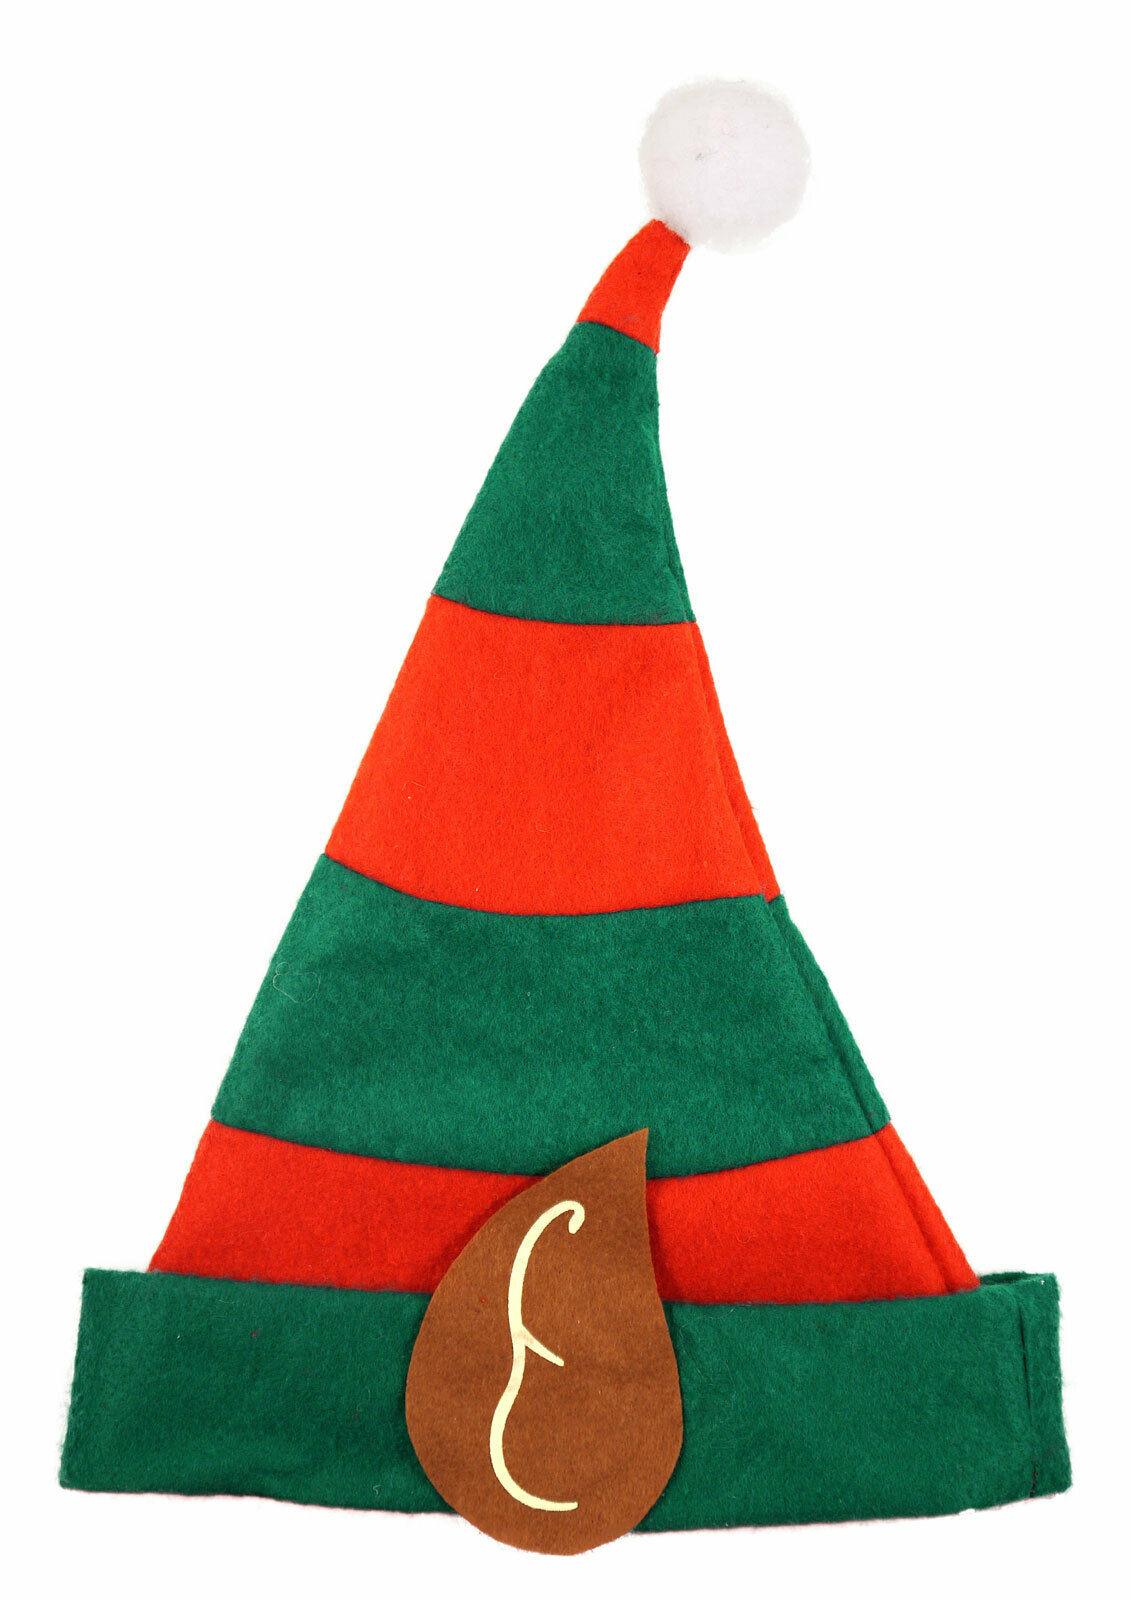 Children Elf Hat with Pixie Ears Stripy Red Green Xmas Fancy Dress Party Hat - Labreeze